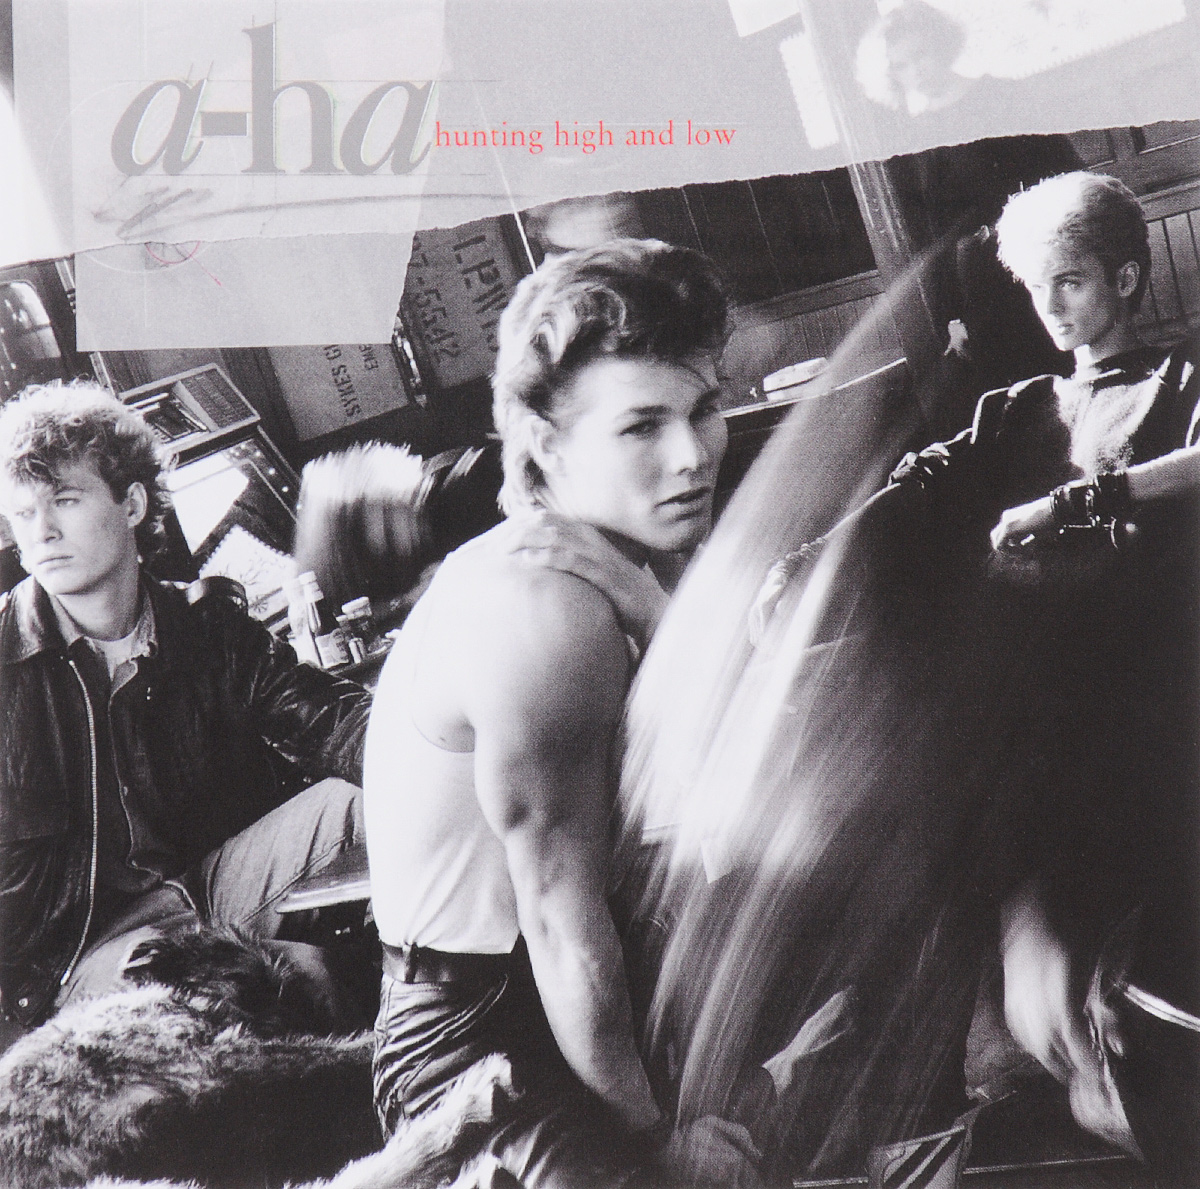 a-ha hunting high and low deluxe torrent